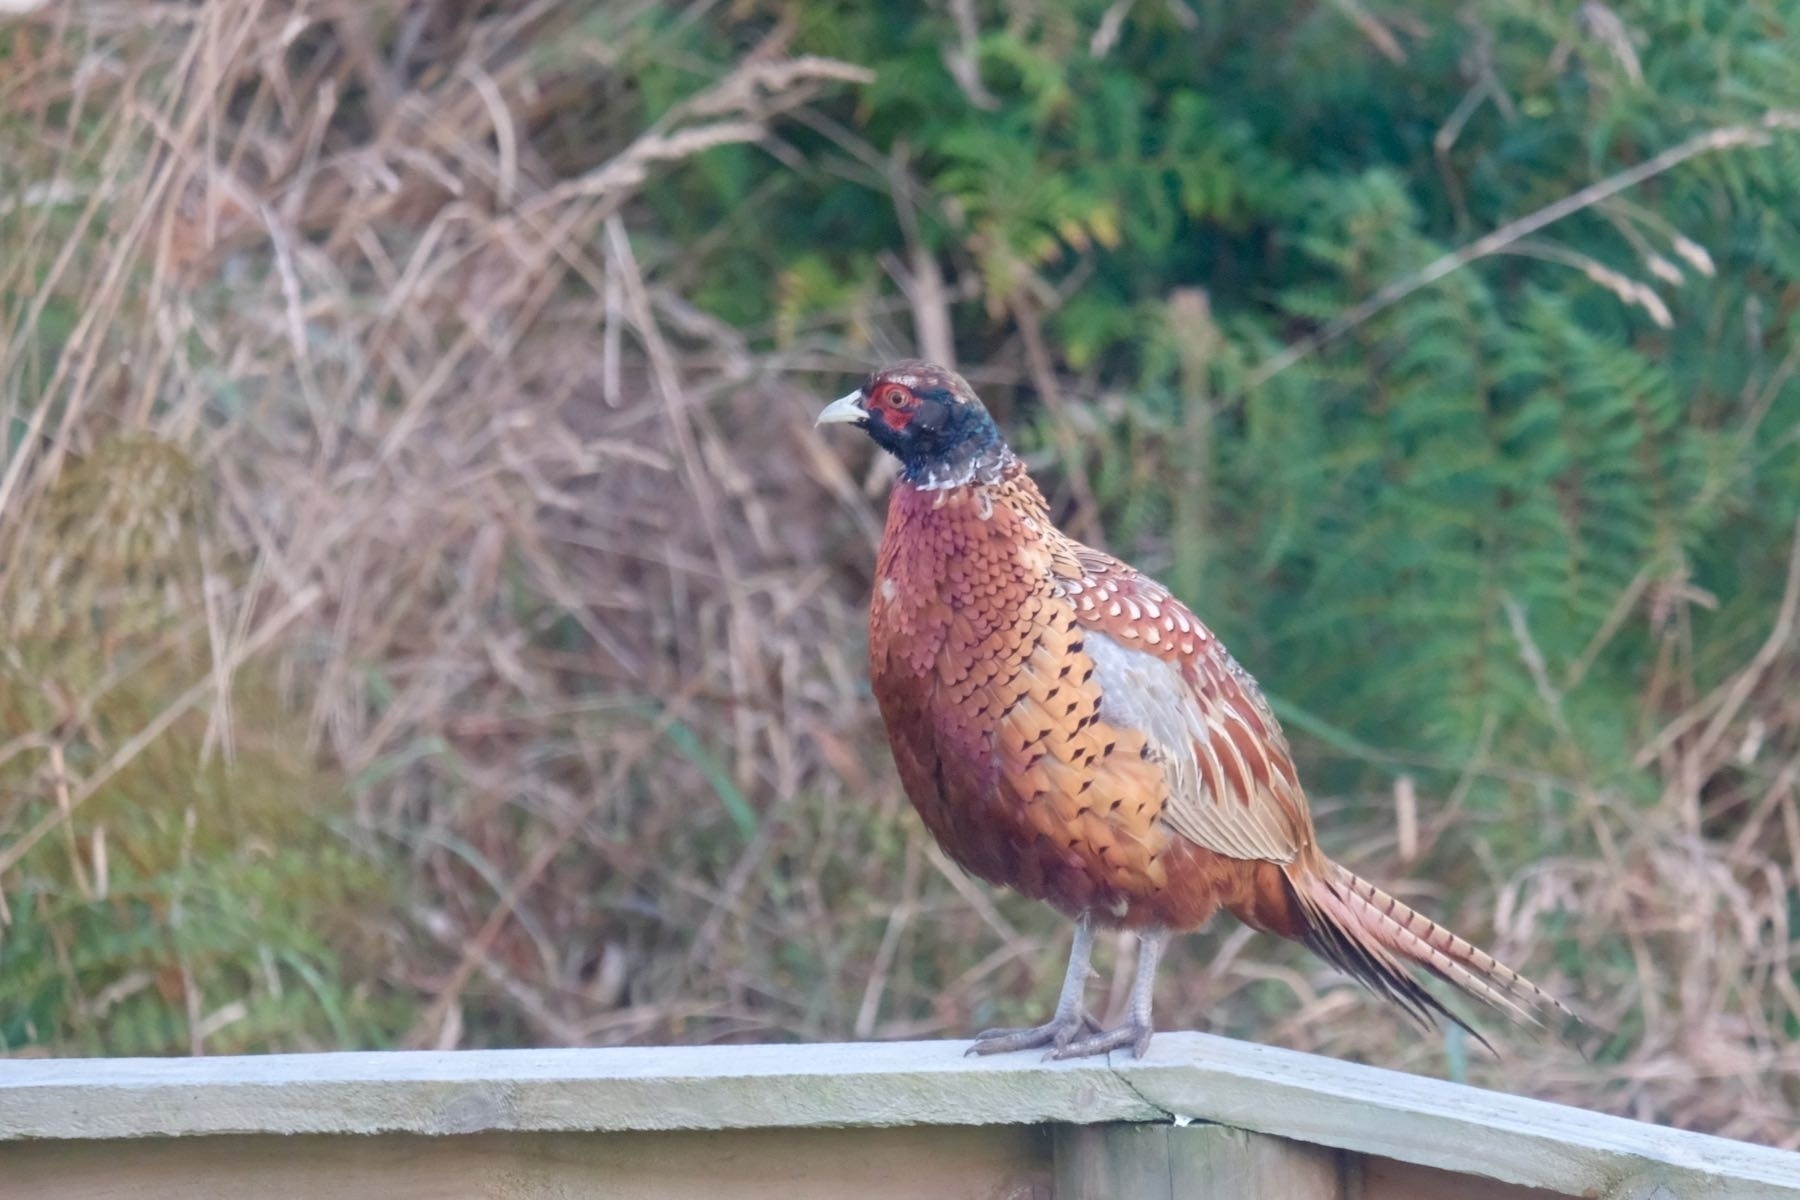 Pheasant on a fence.